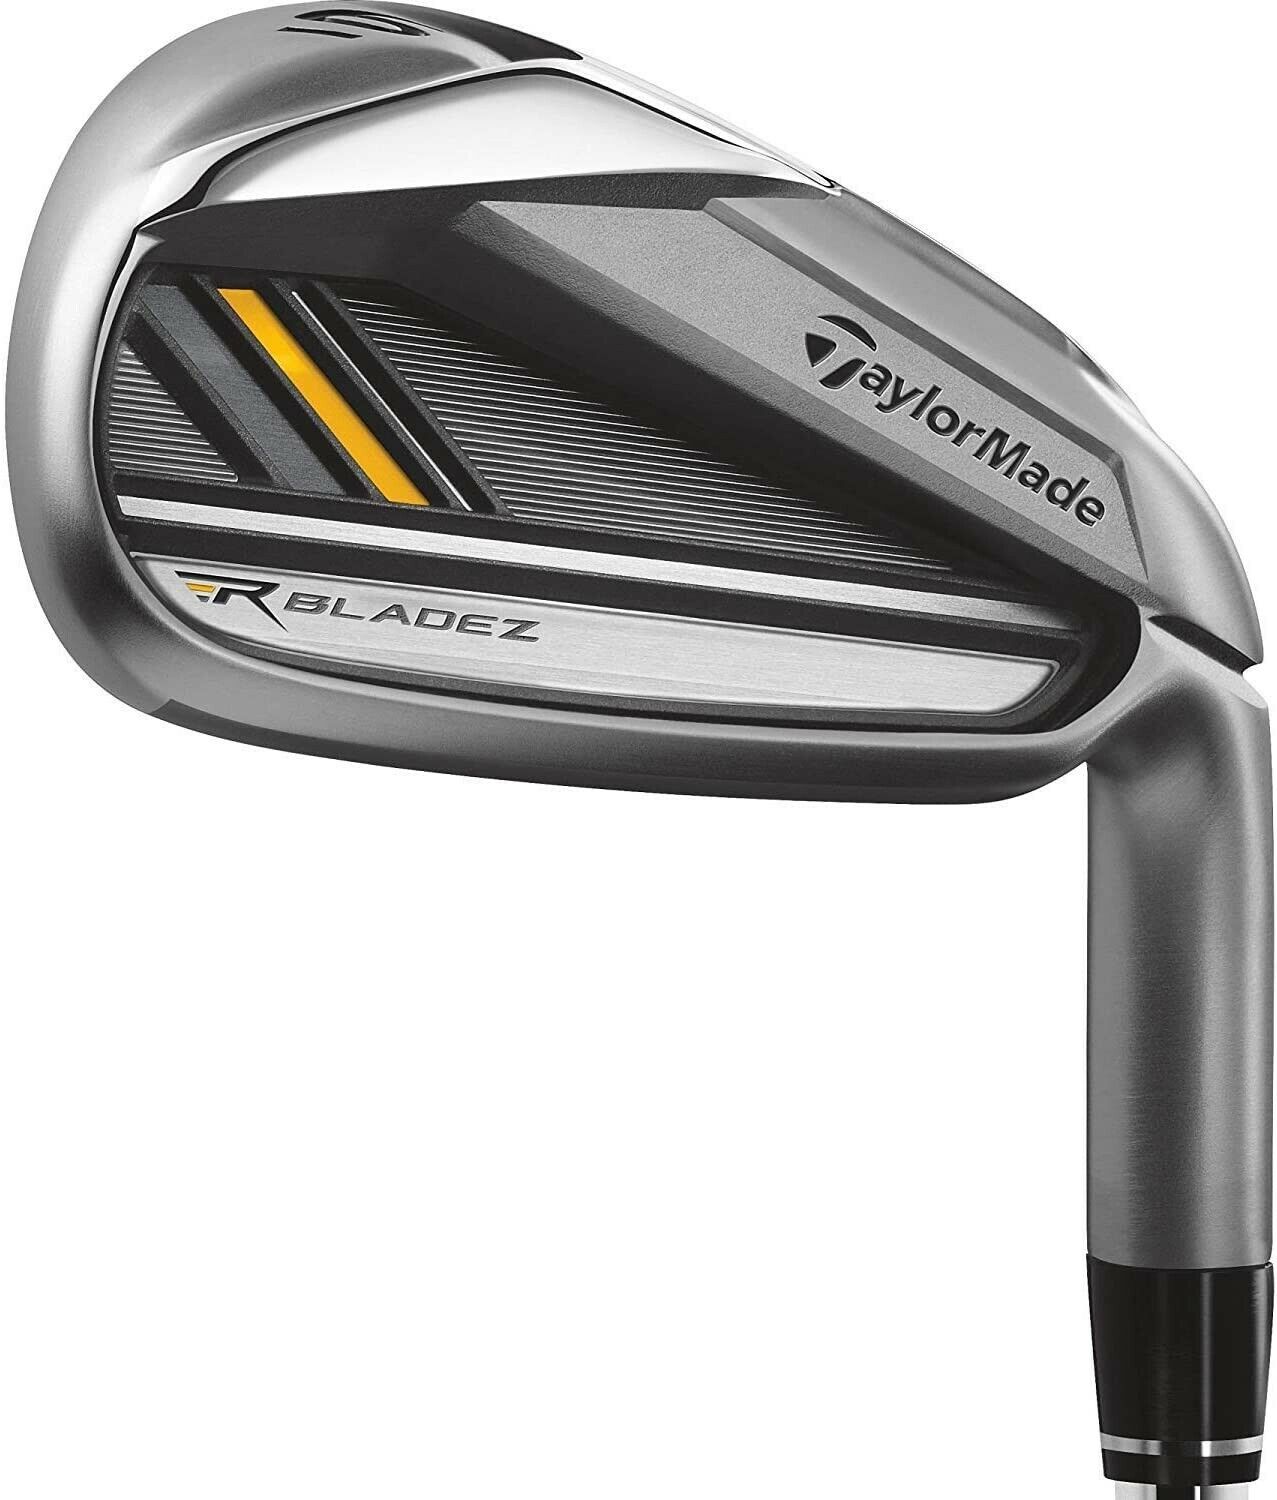 Used Taylormade Rocketballz irons 5-pw 